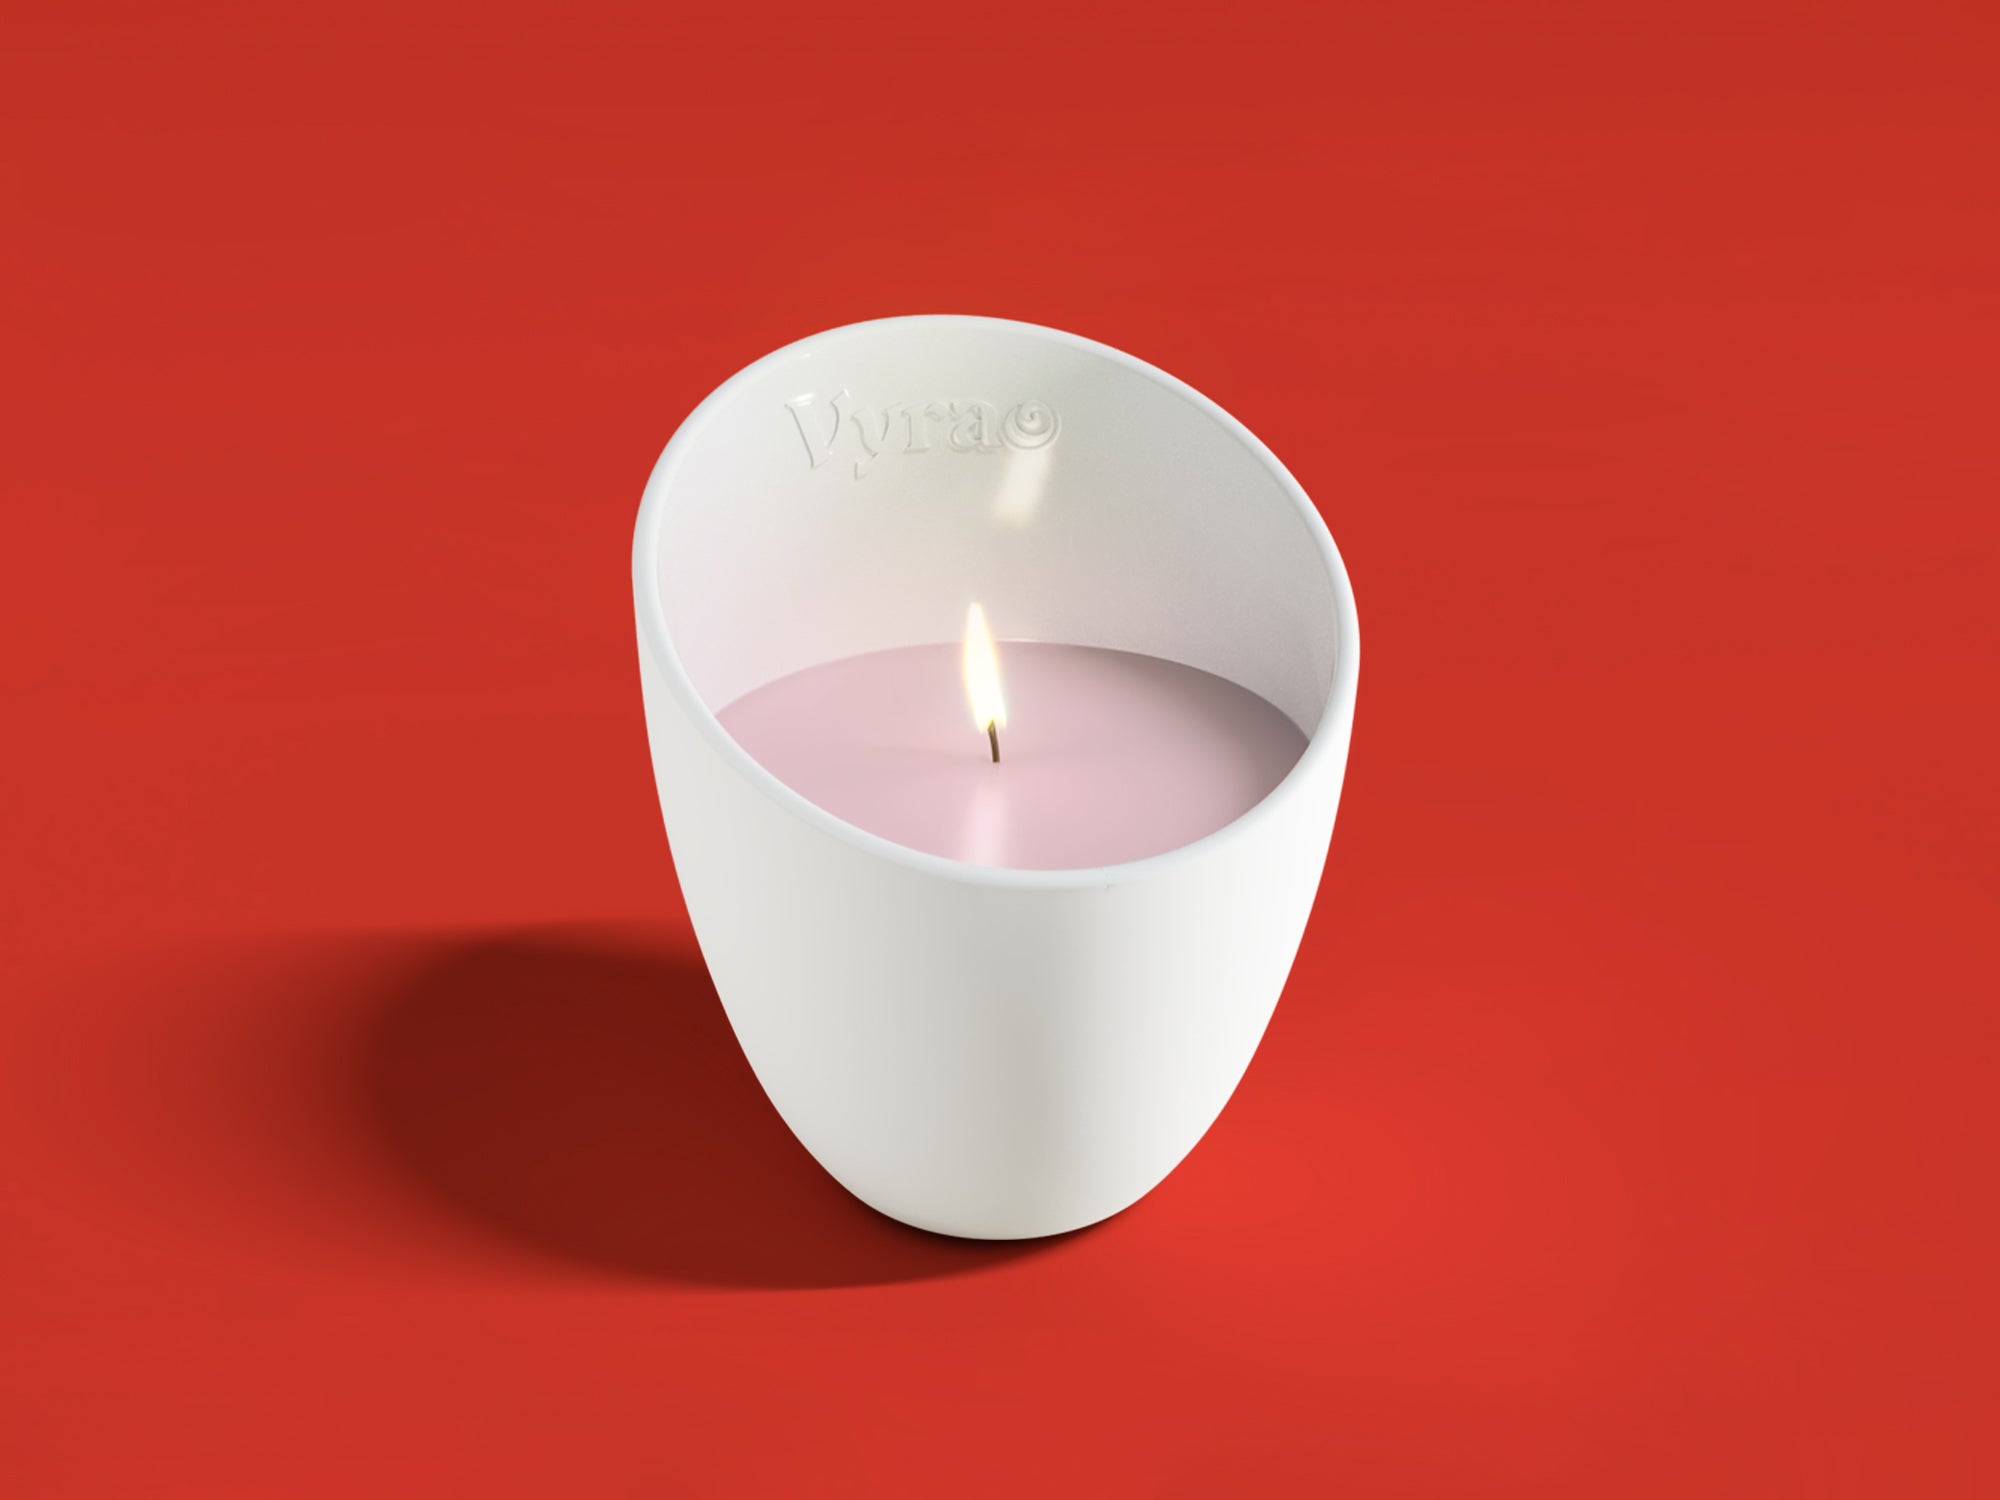 A Christmas Candle for Love? Meet Vyrao's Rose Marie